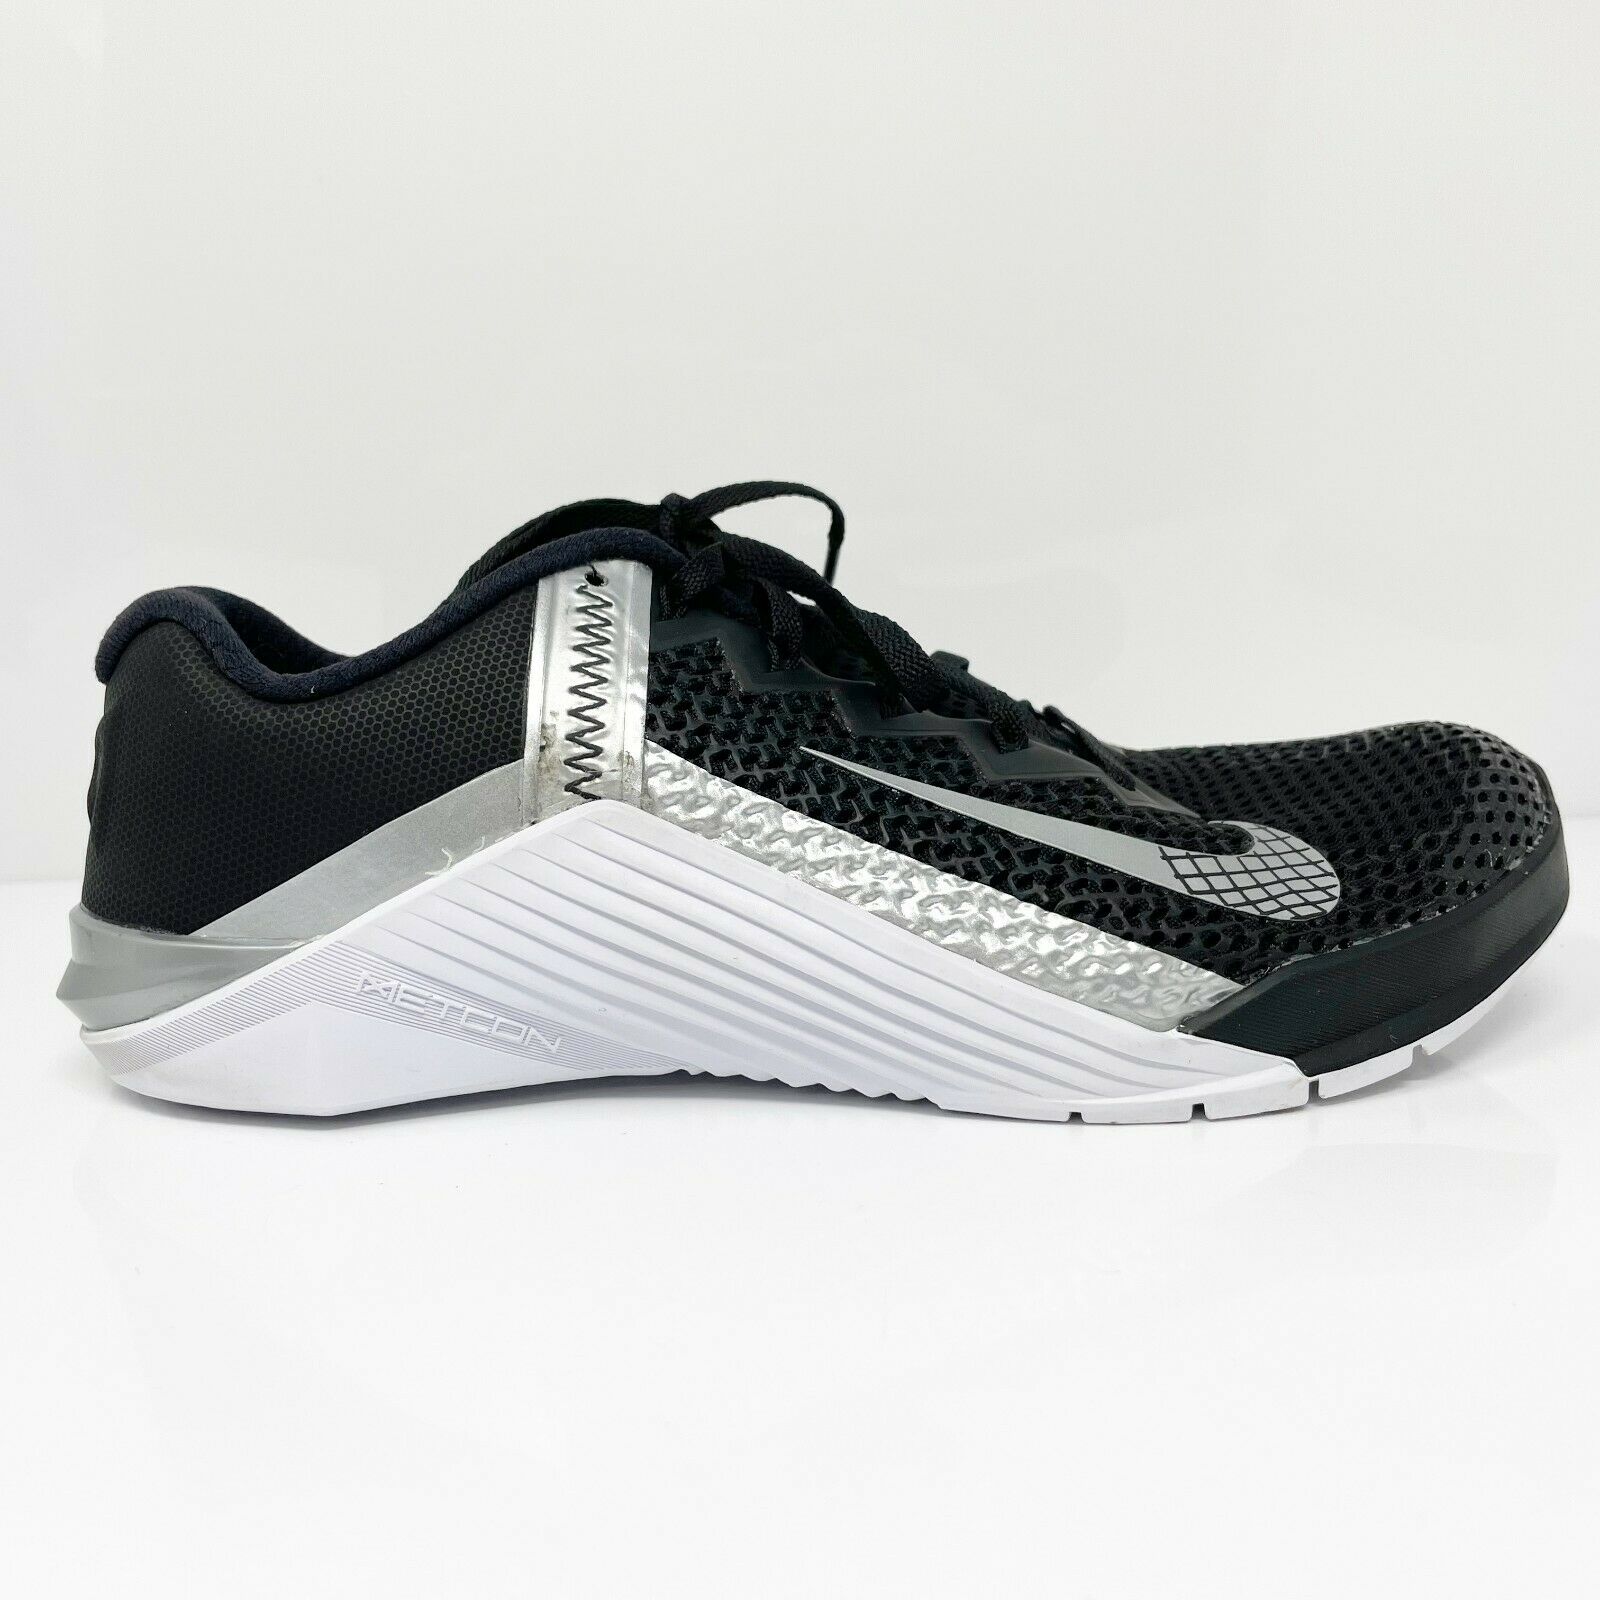 Nike Womens Metcon 6 AT3160-010 Black White Running Shoes Sneakers Size 8.5